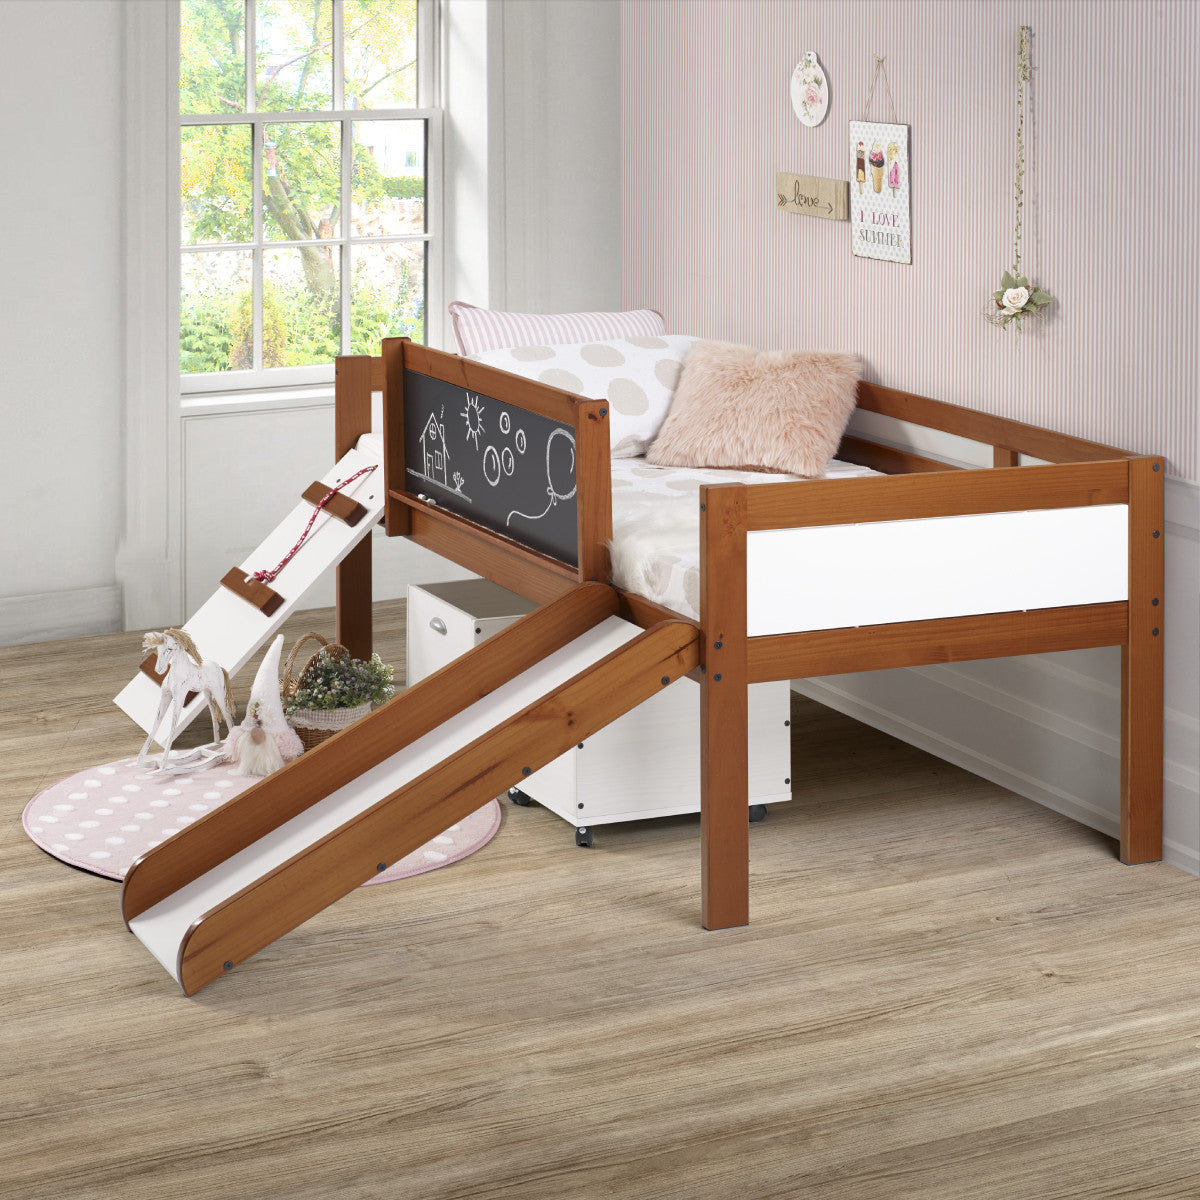 TWIN ART PLAY JUNIOR LOW LOFT WITH TOY BOXES IN ESPRESSO FINISH